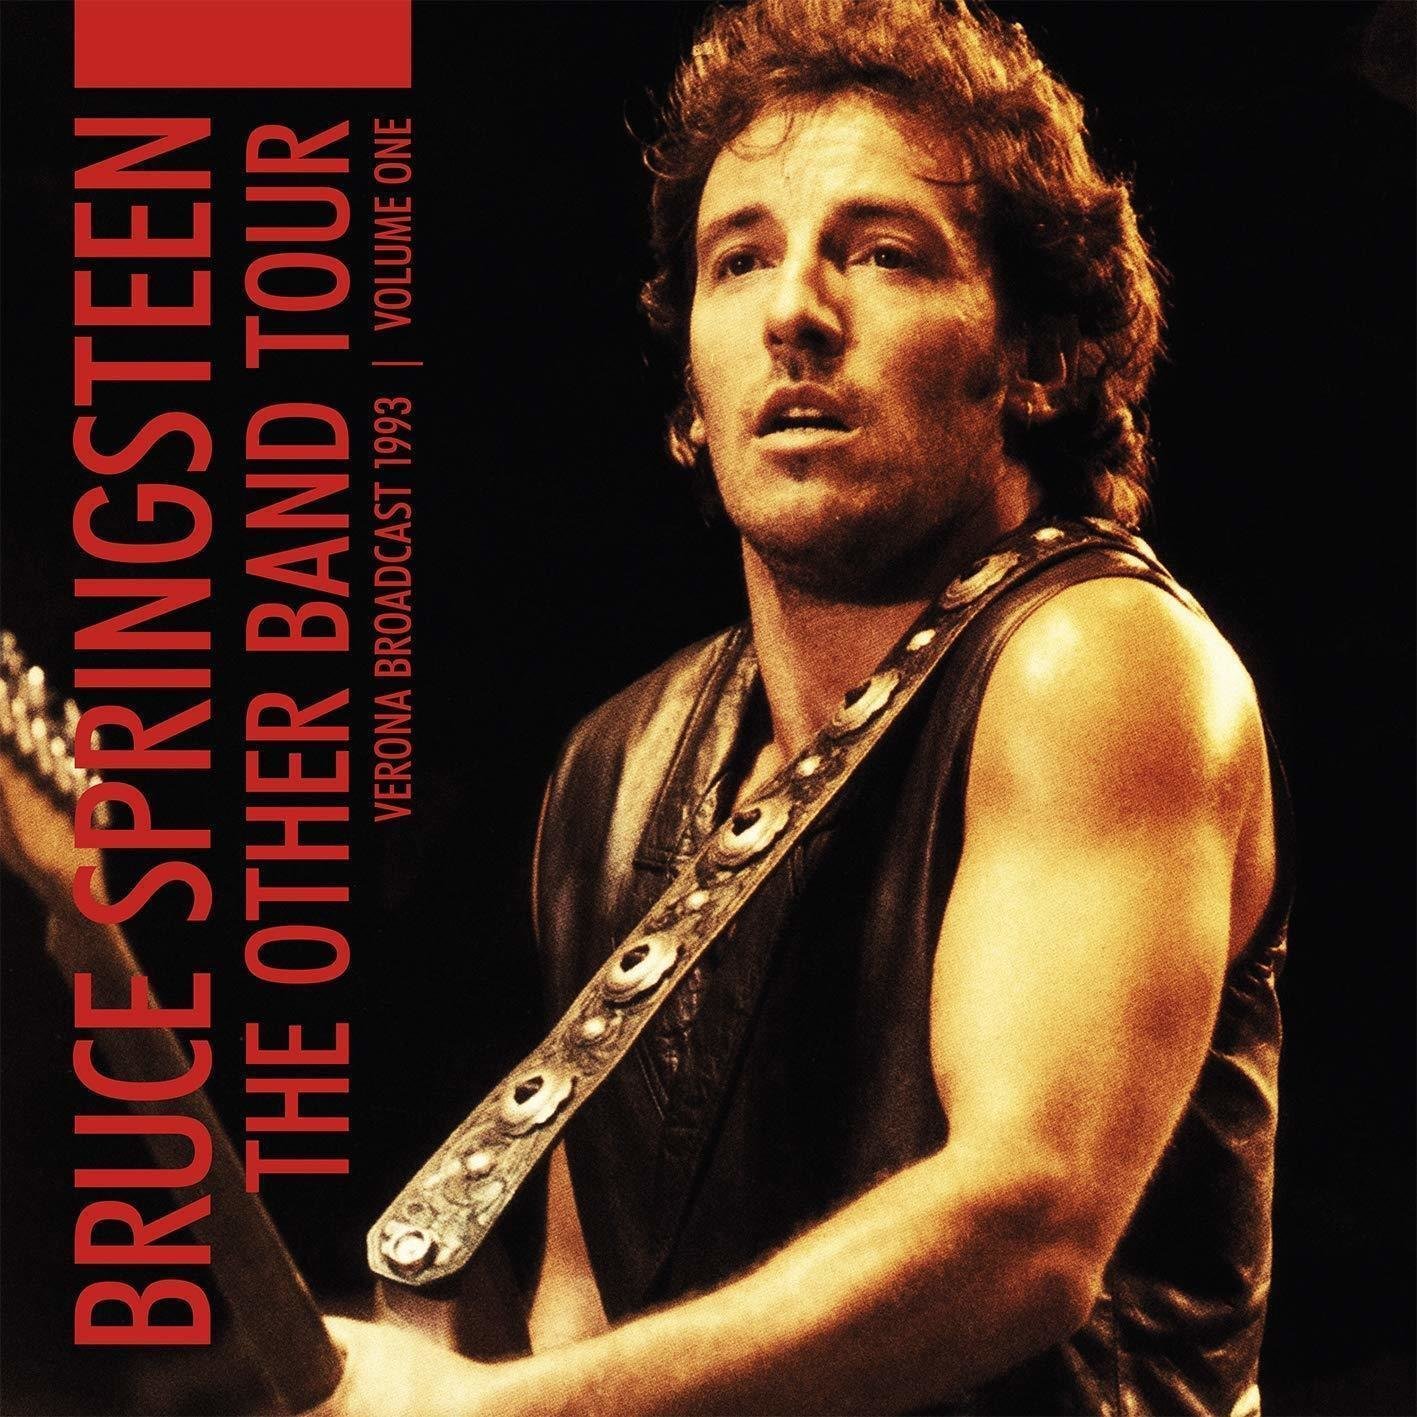 Vinyl Record Bruce Springsteen - The Other Band Tour - Verona Broadcast 1993 - Volume One (2 LP)